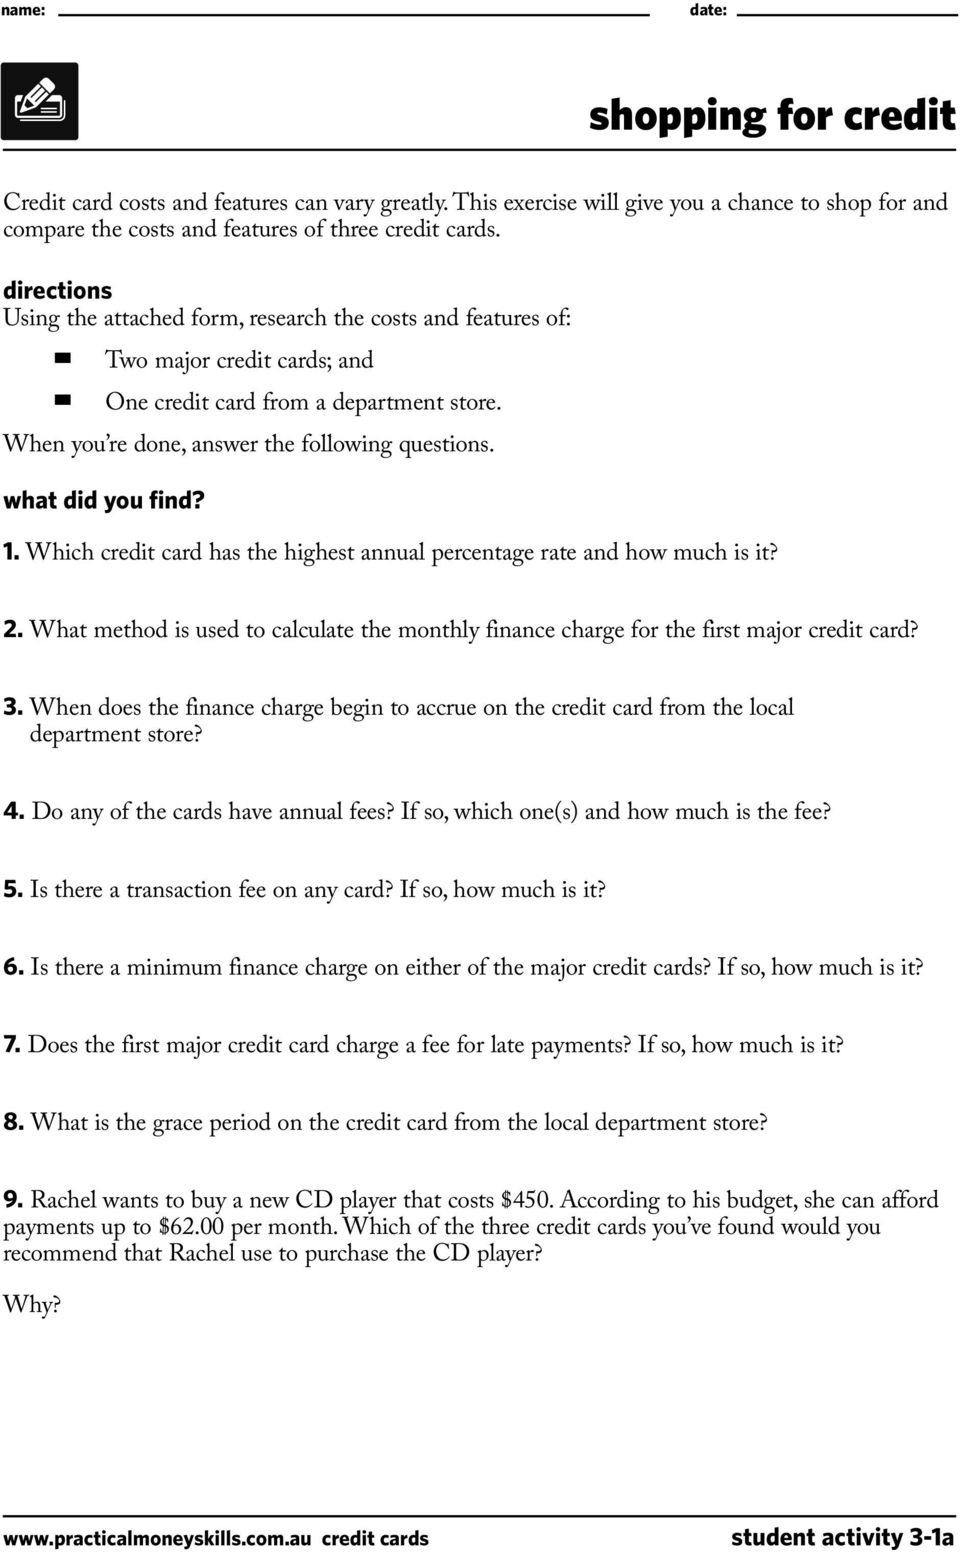 Student Activities Lesson Three Credit Cards 0713  Pdf